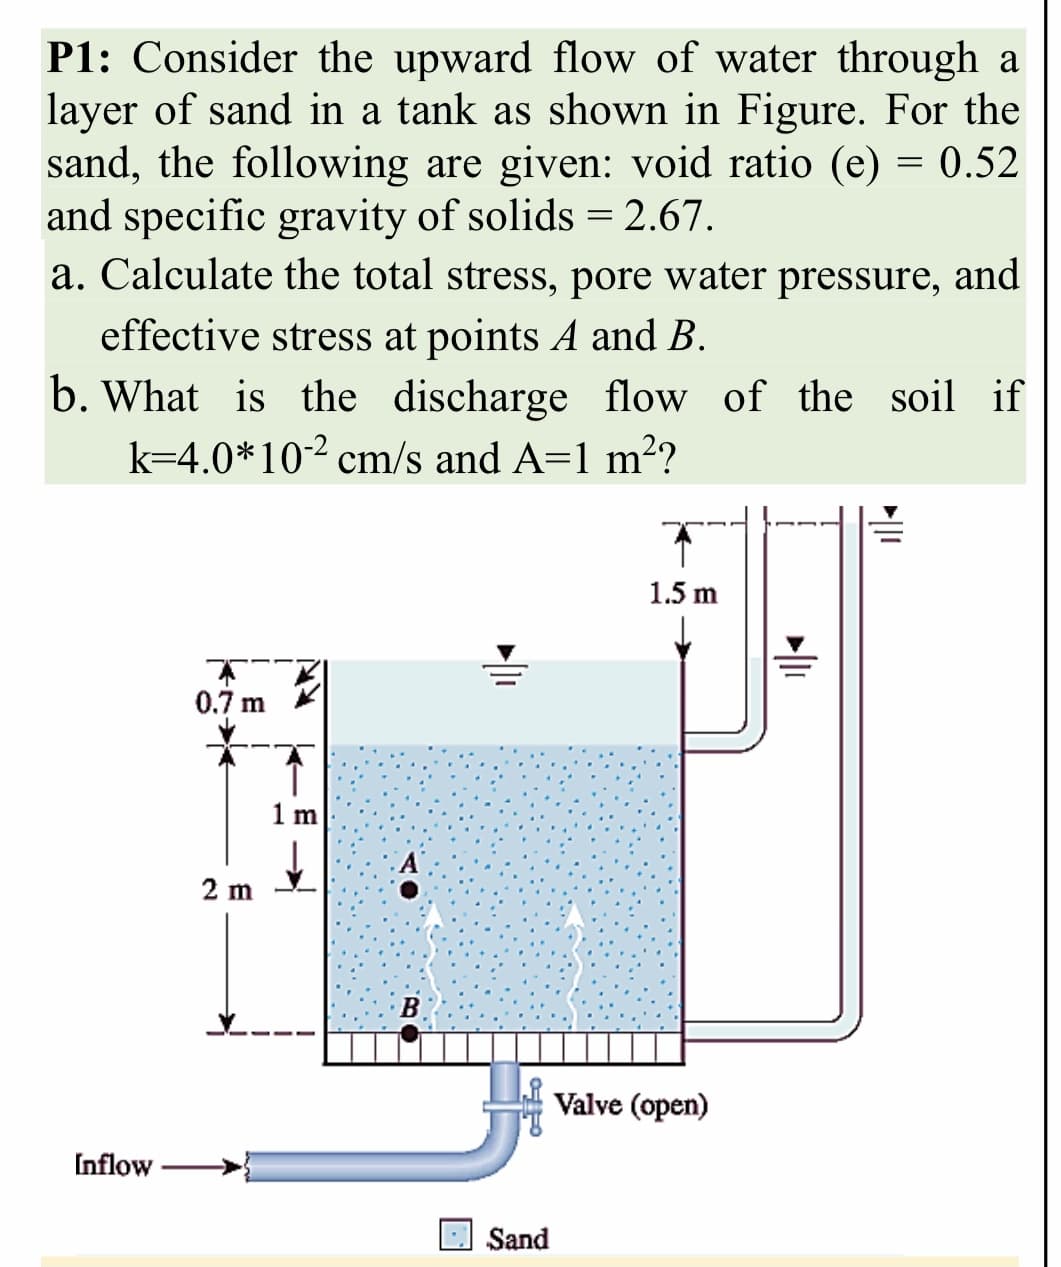 P1: Consider the upward flow of water through a
layer of sand in a tank as shown in Figure. For the
sand, the following are given: void ratio (e) = 0.52
and specific gravity of solids = 2.67.
a. Calculate the total stress, pore water pressure, and
effective stress at points A and B.
b. What is the discharge flow of the soil if
k=4.0*10-2 cm/s and A=1 m2?
1.5 m
0.7 m
1 m
2 m
Valve (open)
Inflow
ESand
